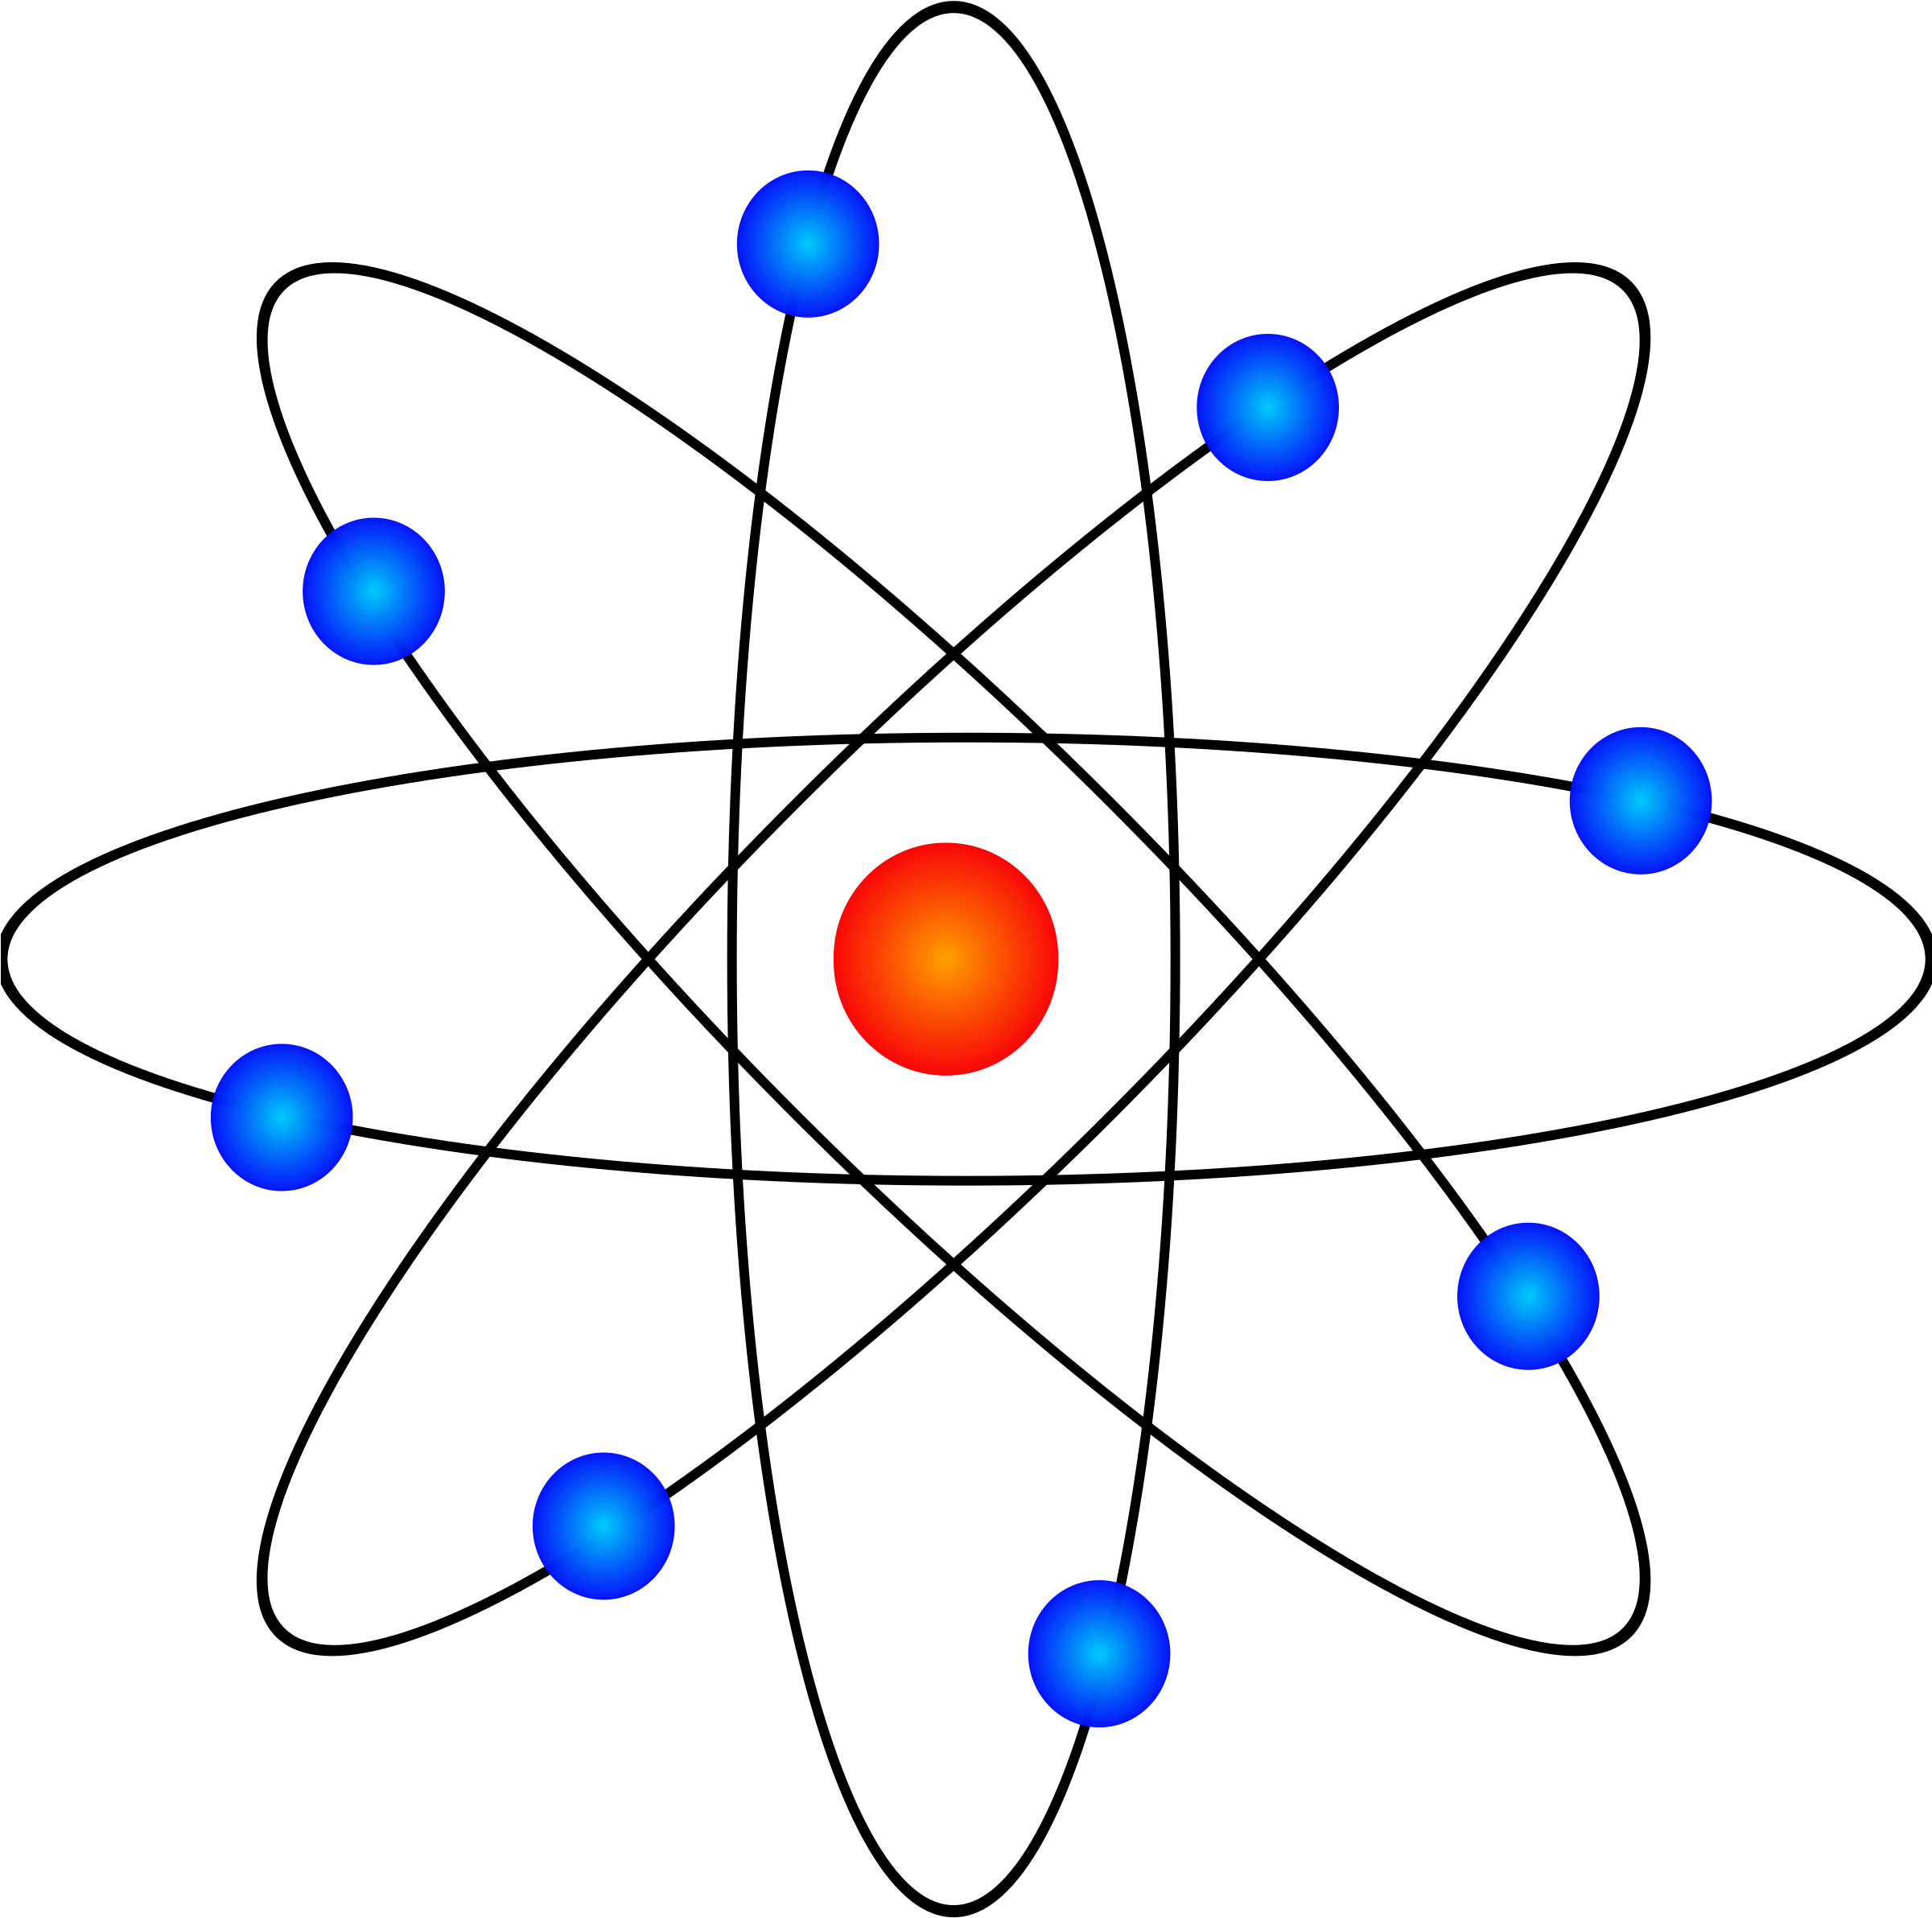 A Red And Blue Circles